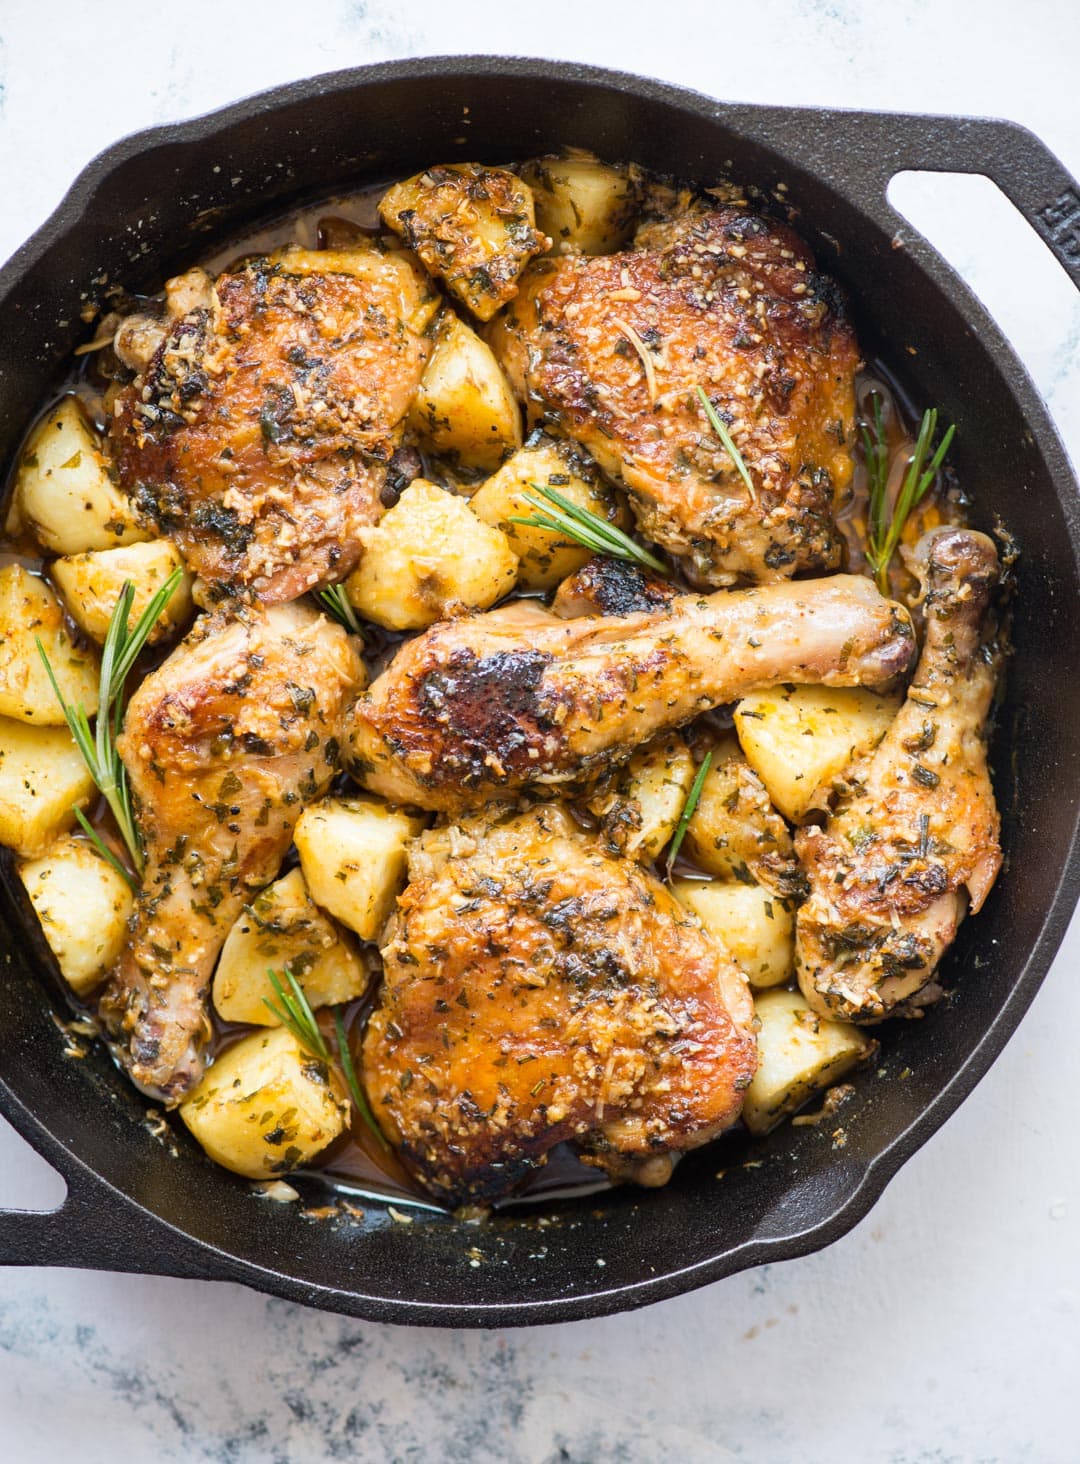 Baked chicken and potatoes in a butter garlic herb sauce, crispy garlic parmesan crusted chicken is a delicious one-pan dinner and very easy to prepare.